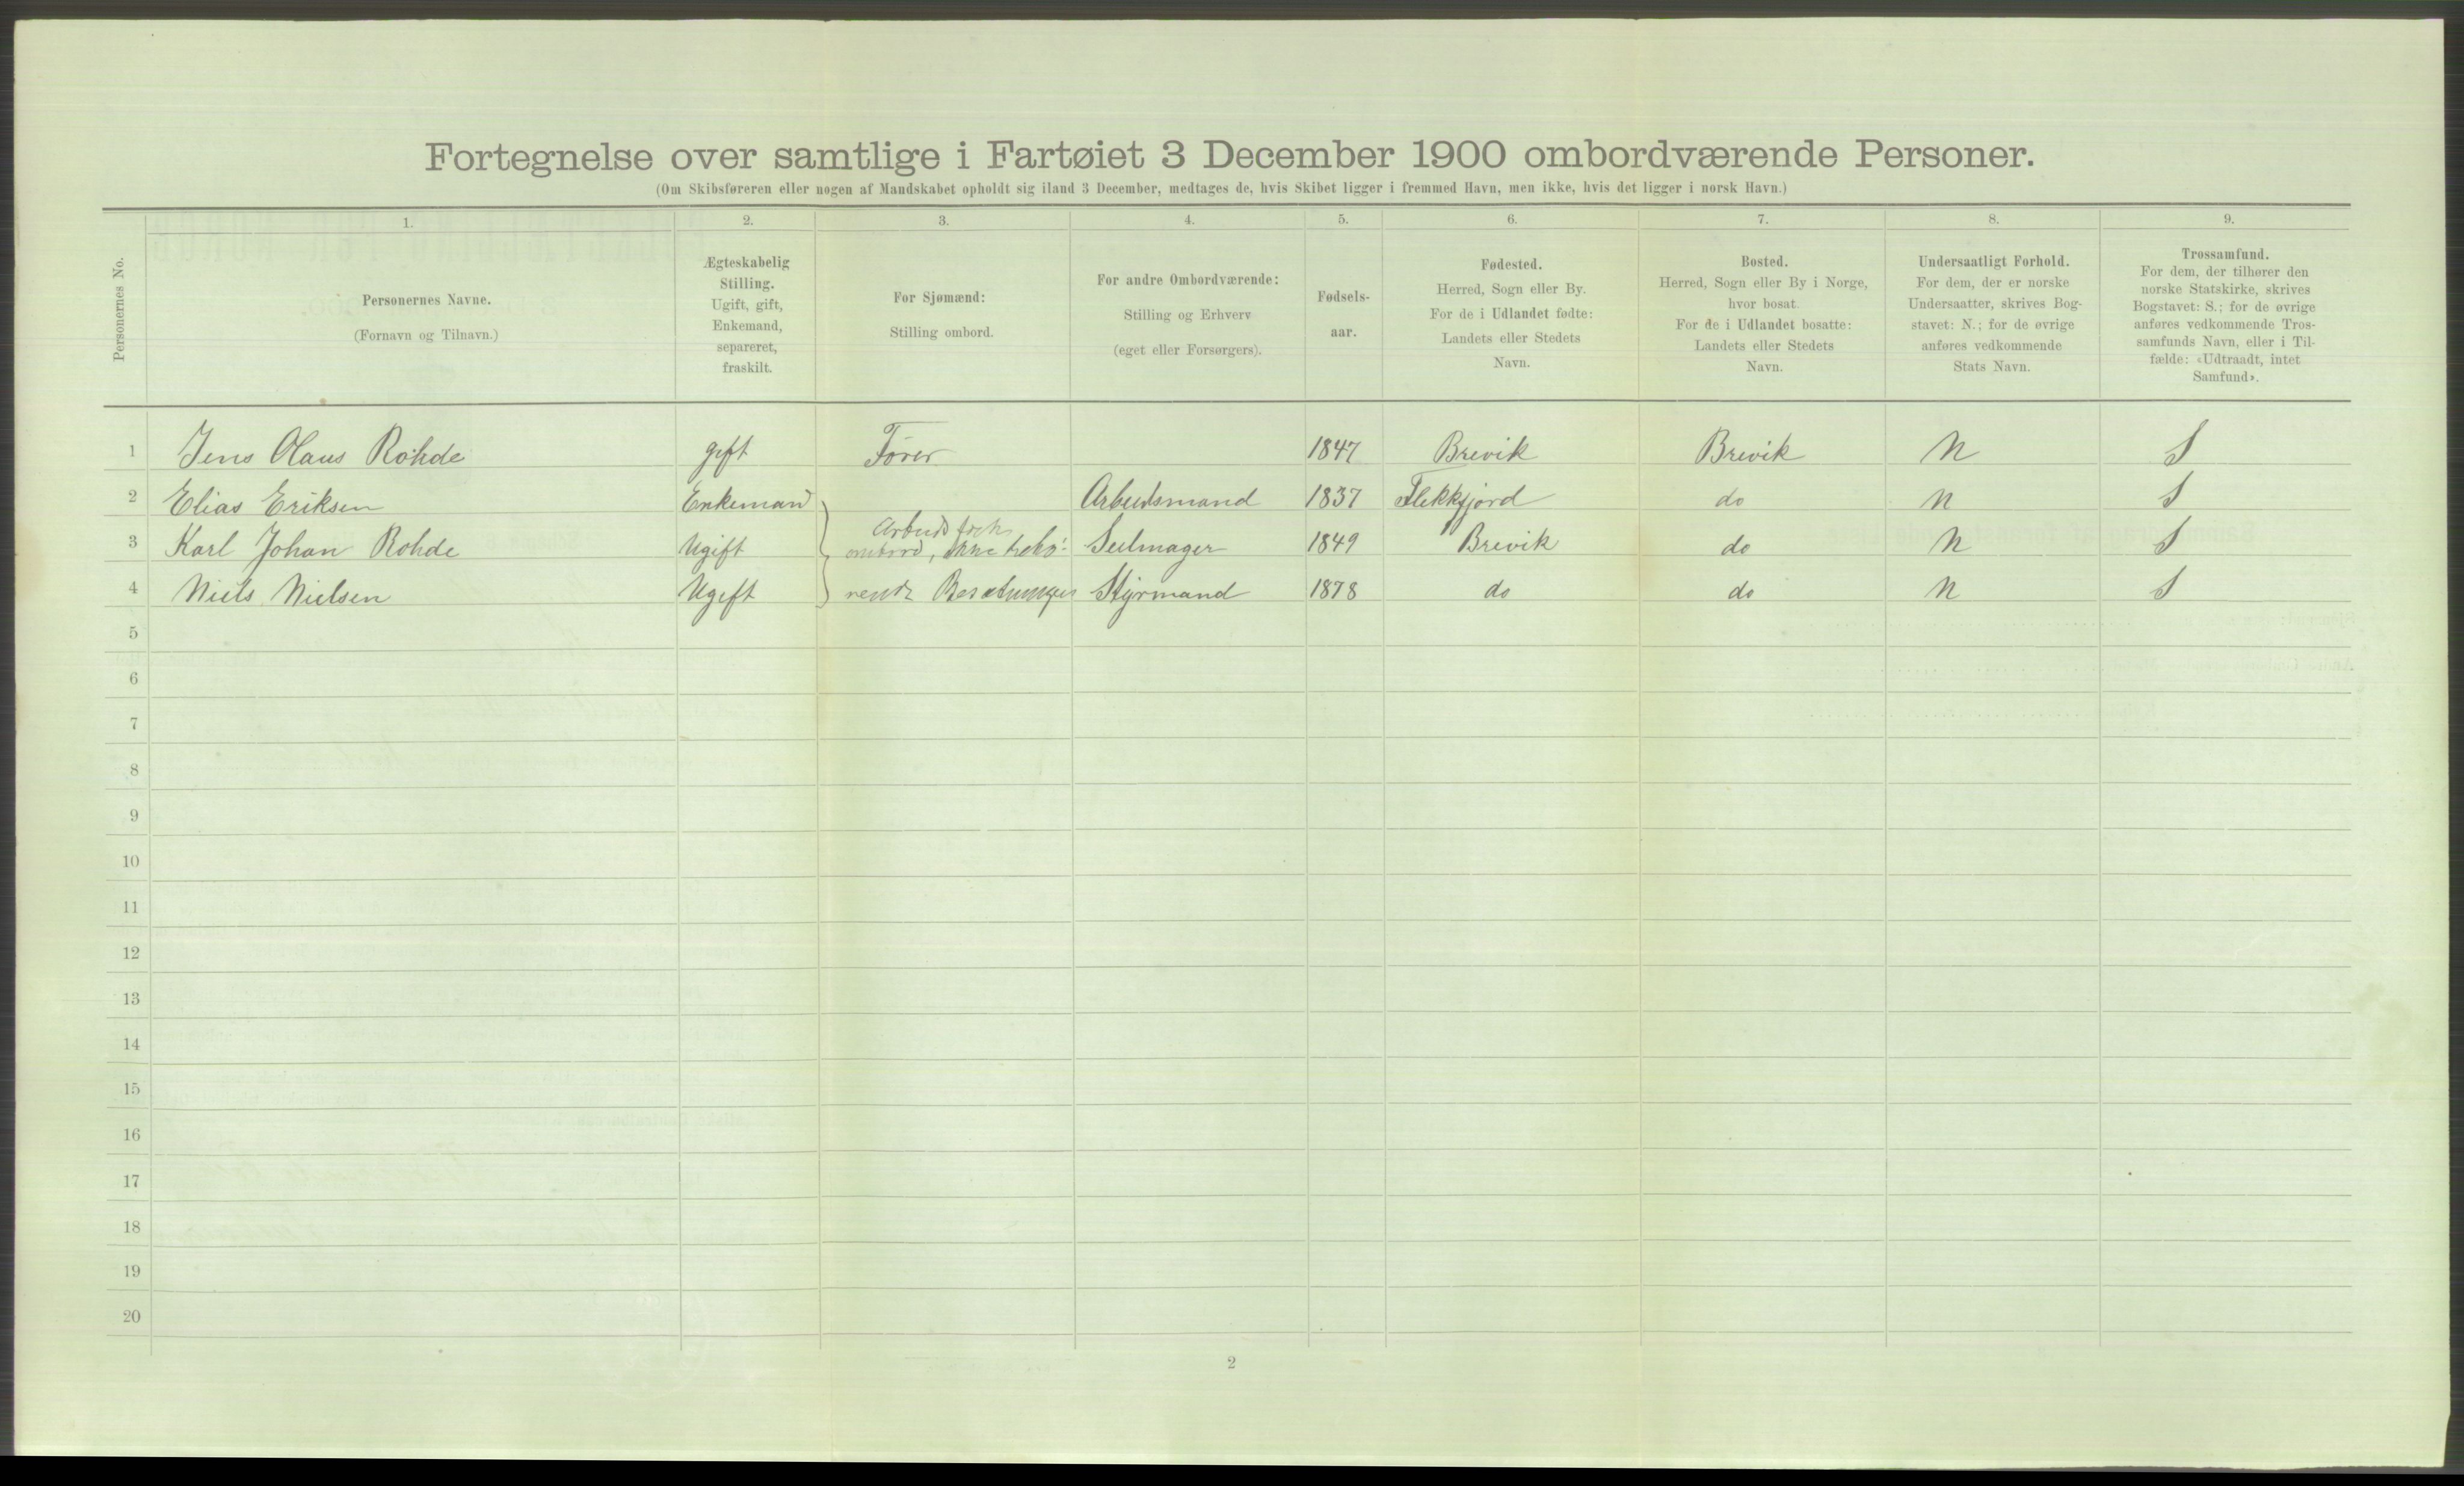 RA, 1900 Census - ship lists from ships in Norwegian harbours, harbours abroad and at sea, 1900, p. 414